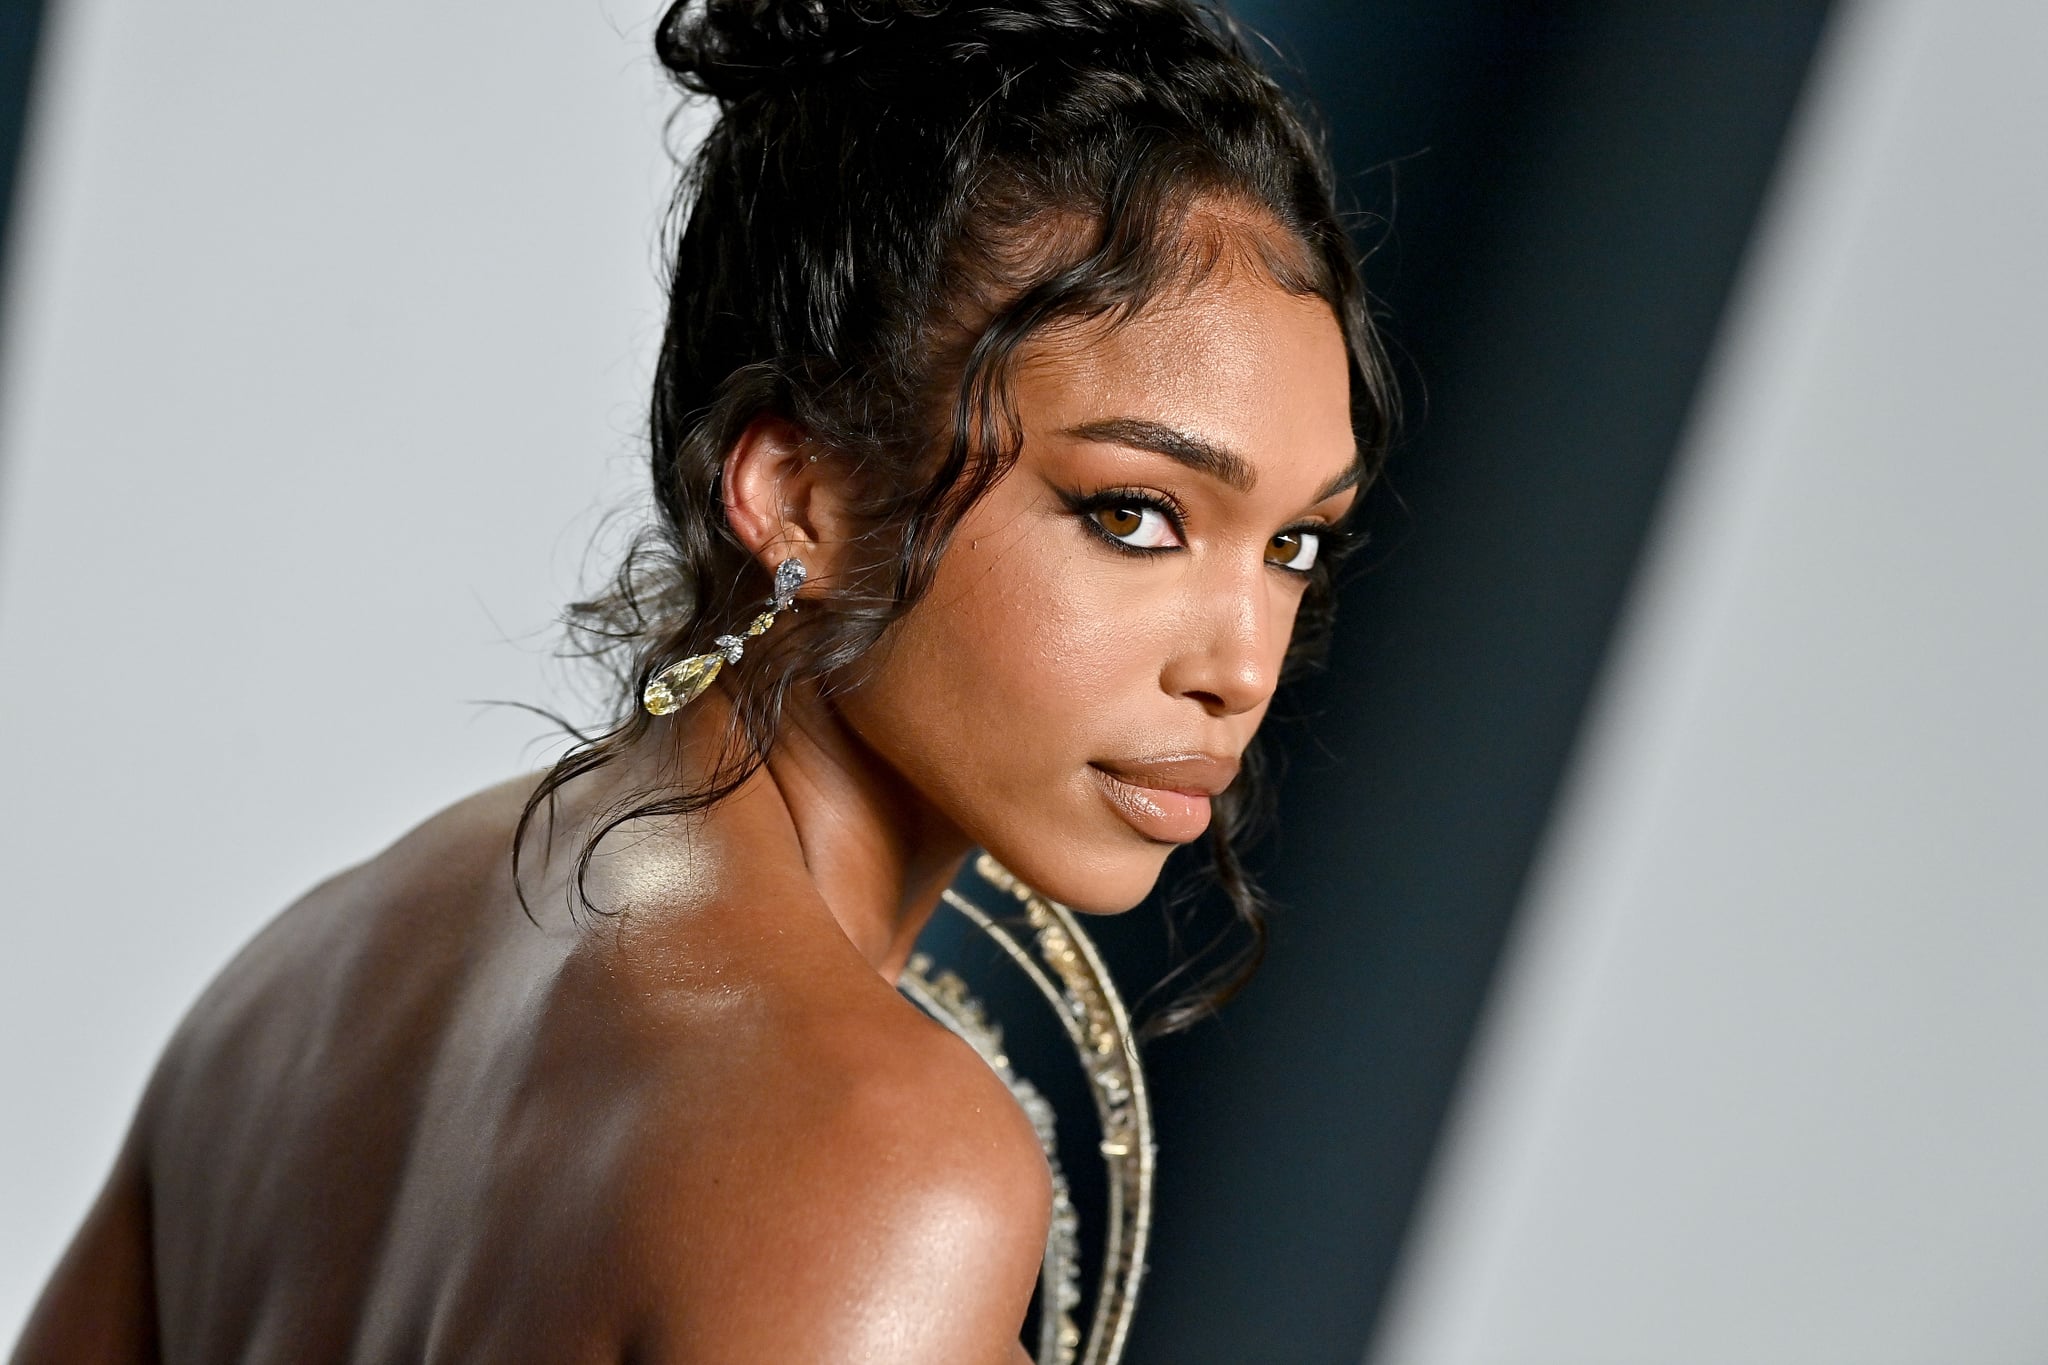 BEVERLY HILLS, CALIFORNIA - MARCH 27: Lori Harvey attends the 2022 Vanity Fair Oscar Party hosted by Radhika Jones at Wallis Annenberg Center for the Performing Arts on March 27, 2022 in Beverly Hills, California. (Photo by Axelle/Bauer-Griffin/FilmMagic)